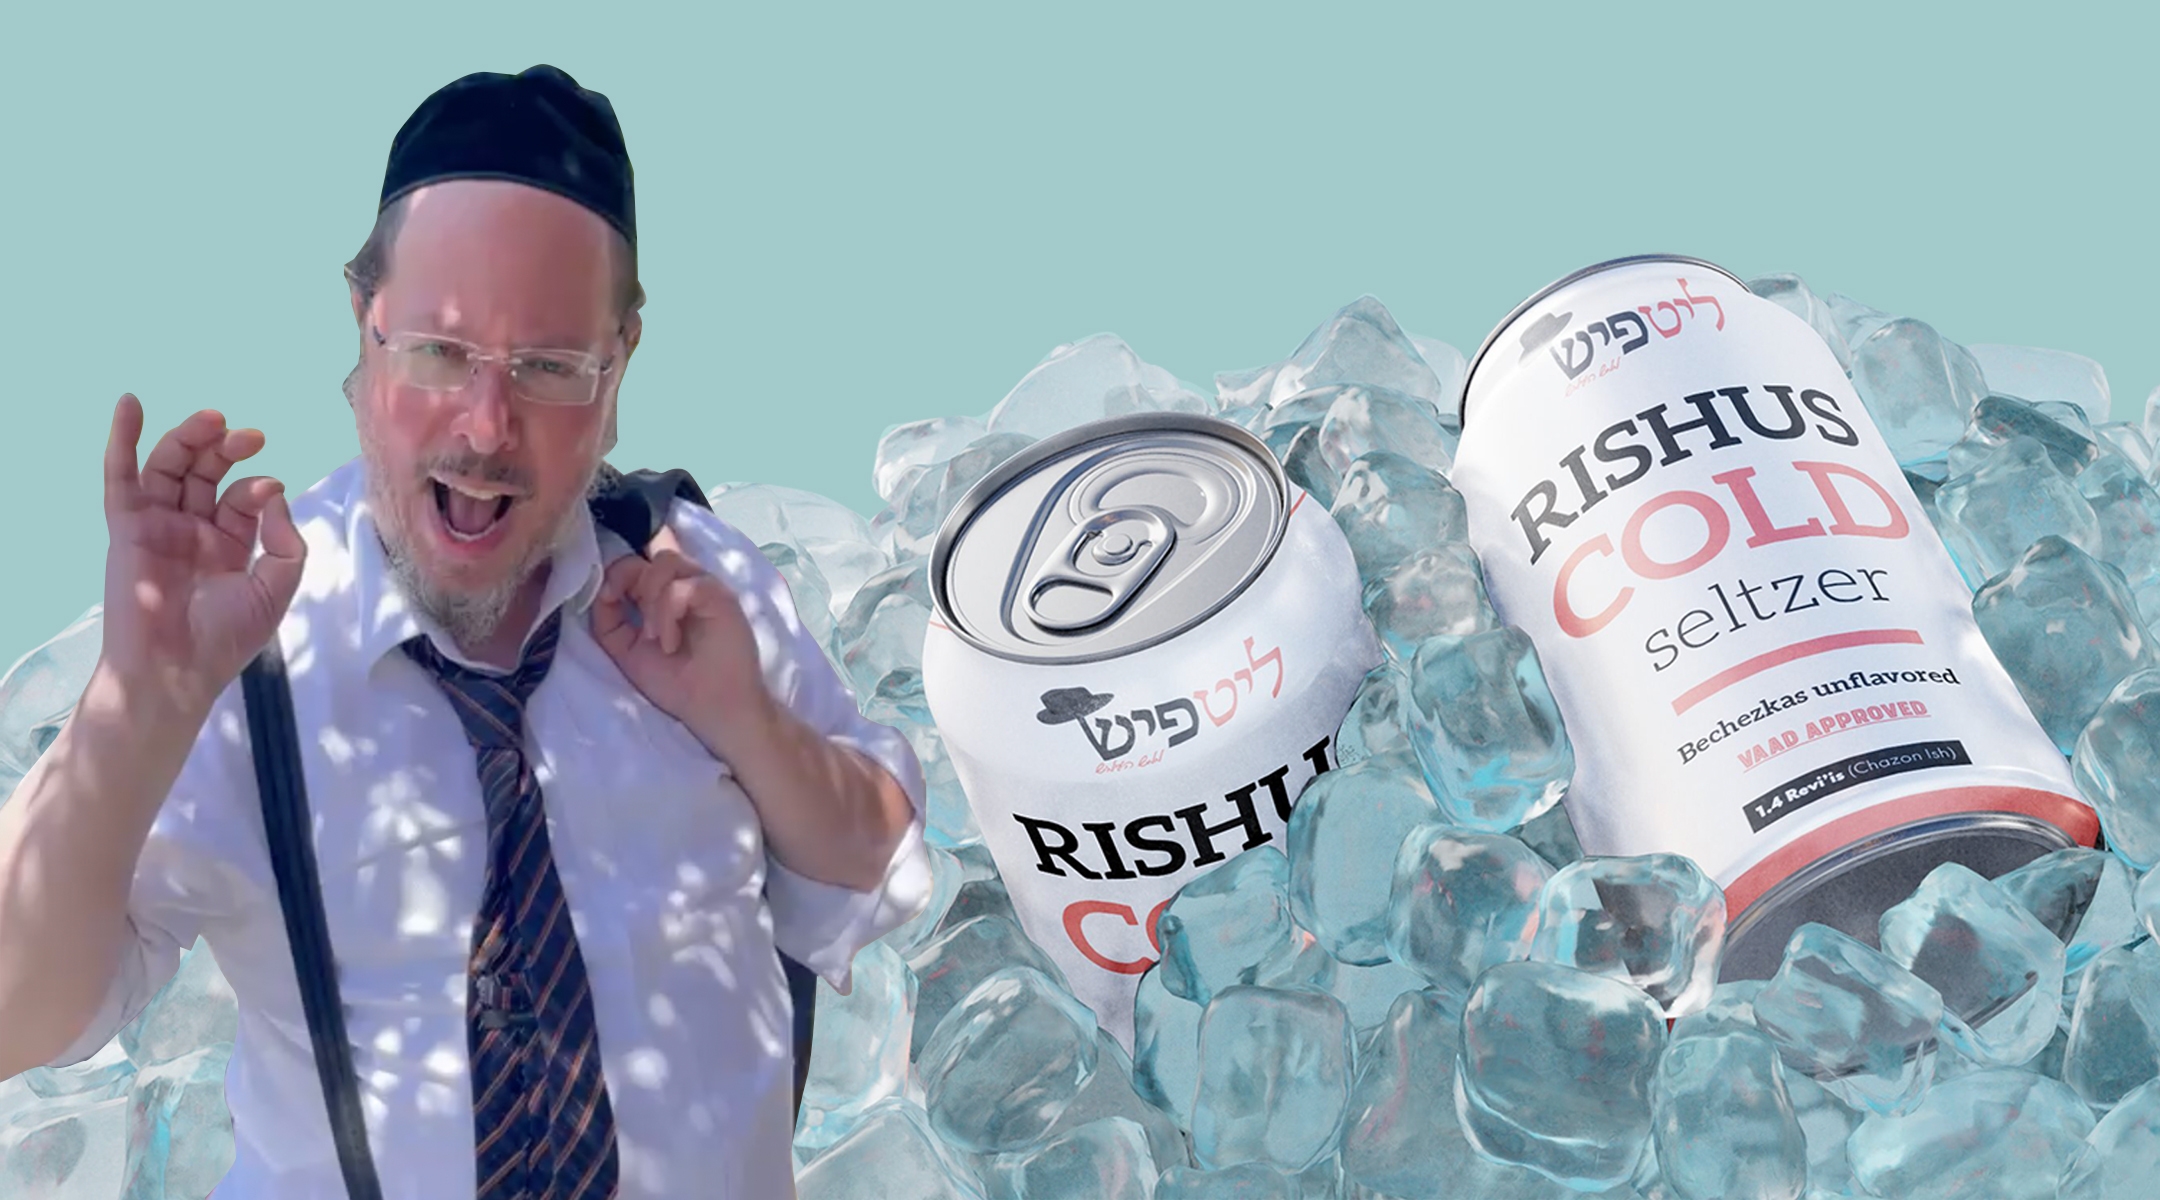 Rabbi Aryeh Moshe Lieser went viral in the Orthodox world for talking about Cold Seltzer and studying the Torah. (Twitter/Yakovolf)